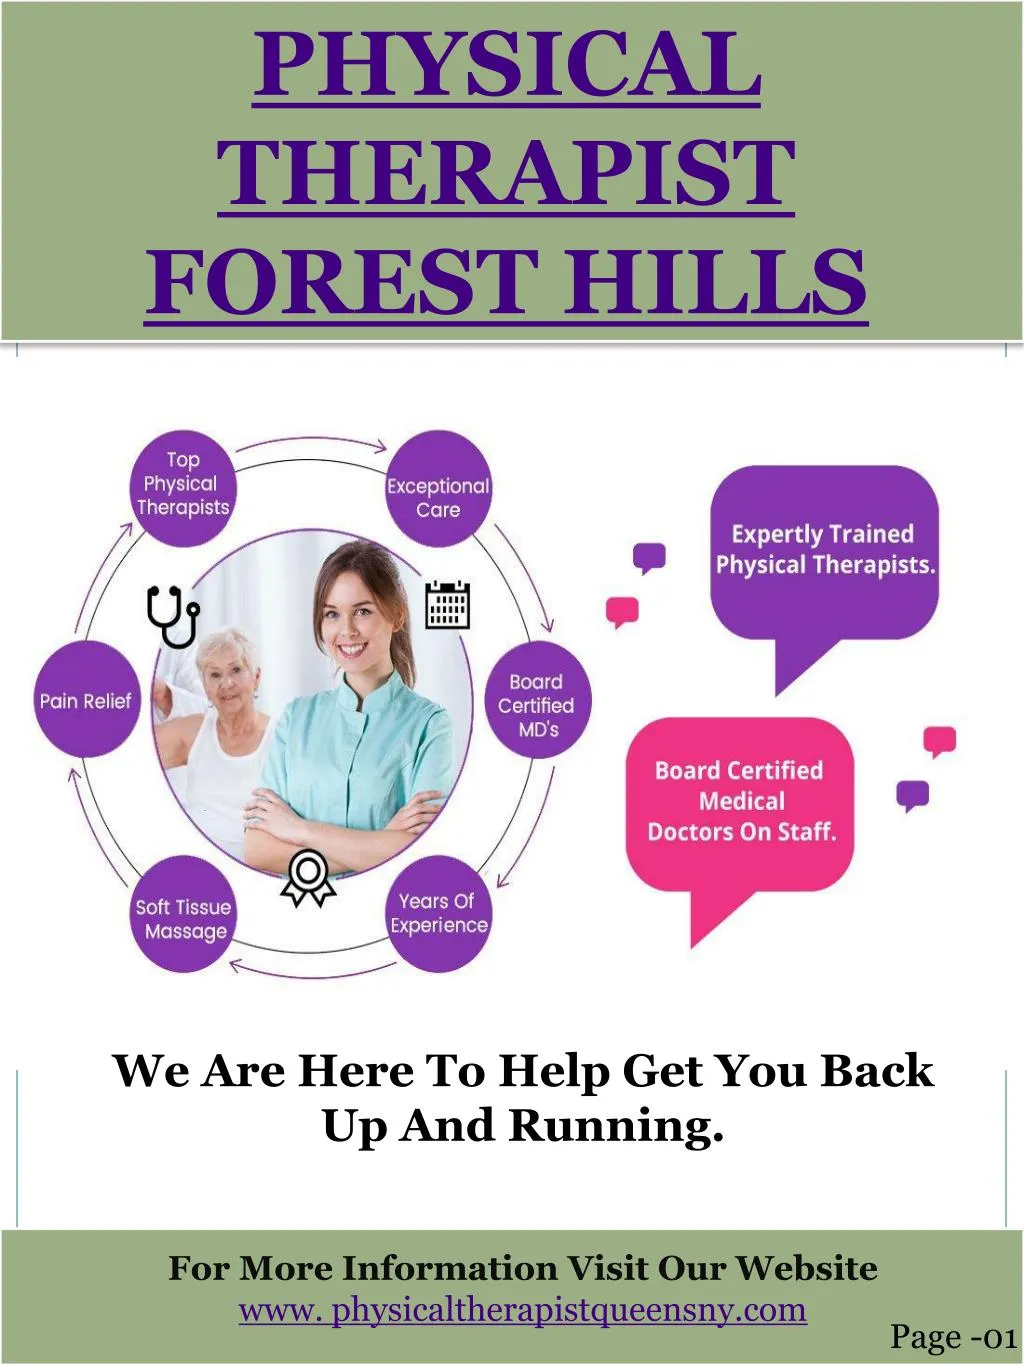 physical therapist forest hills